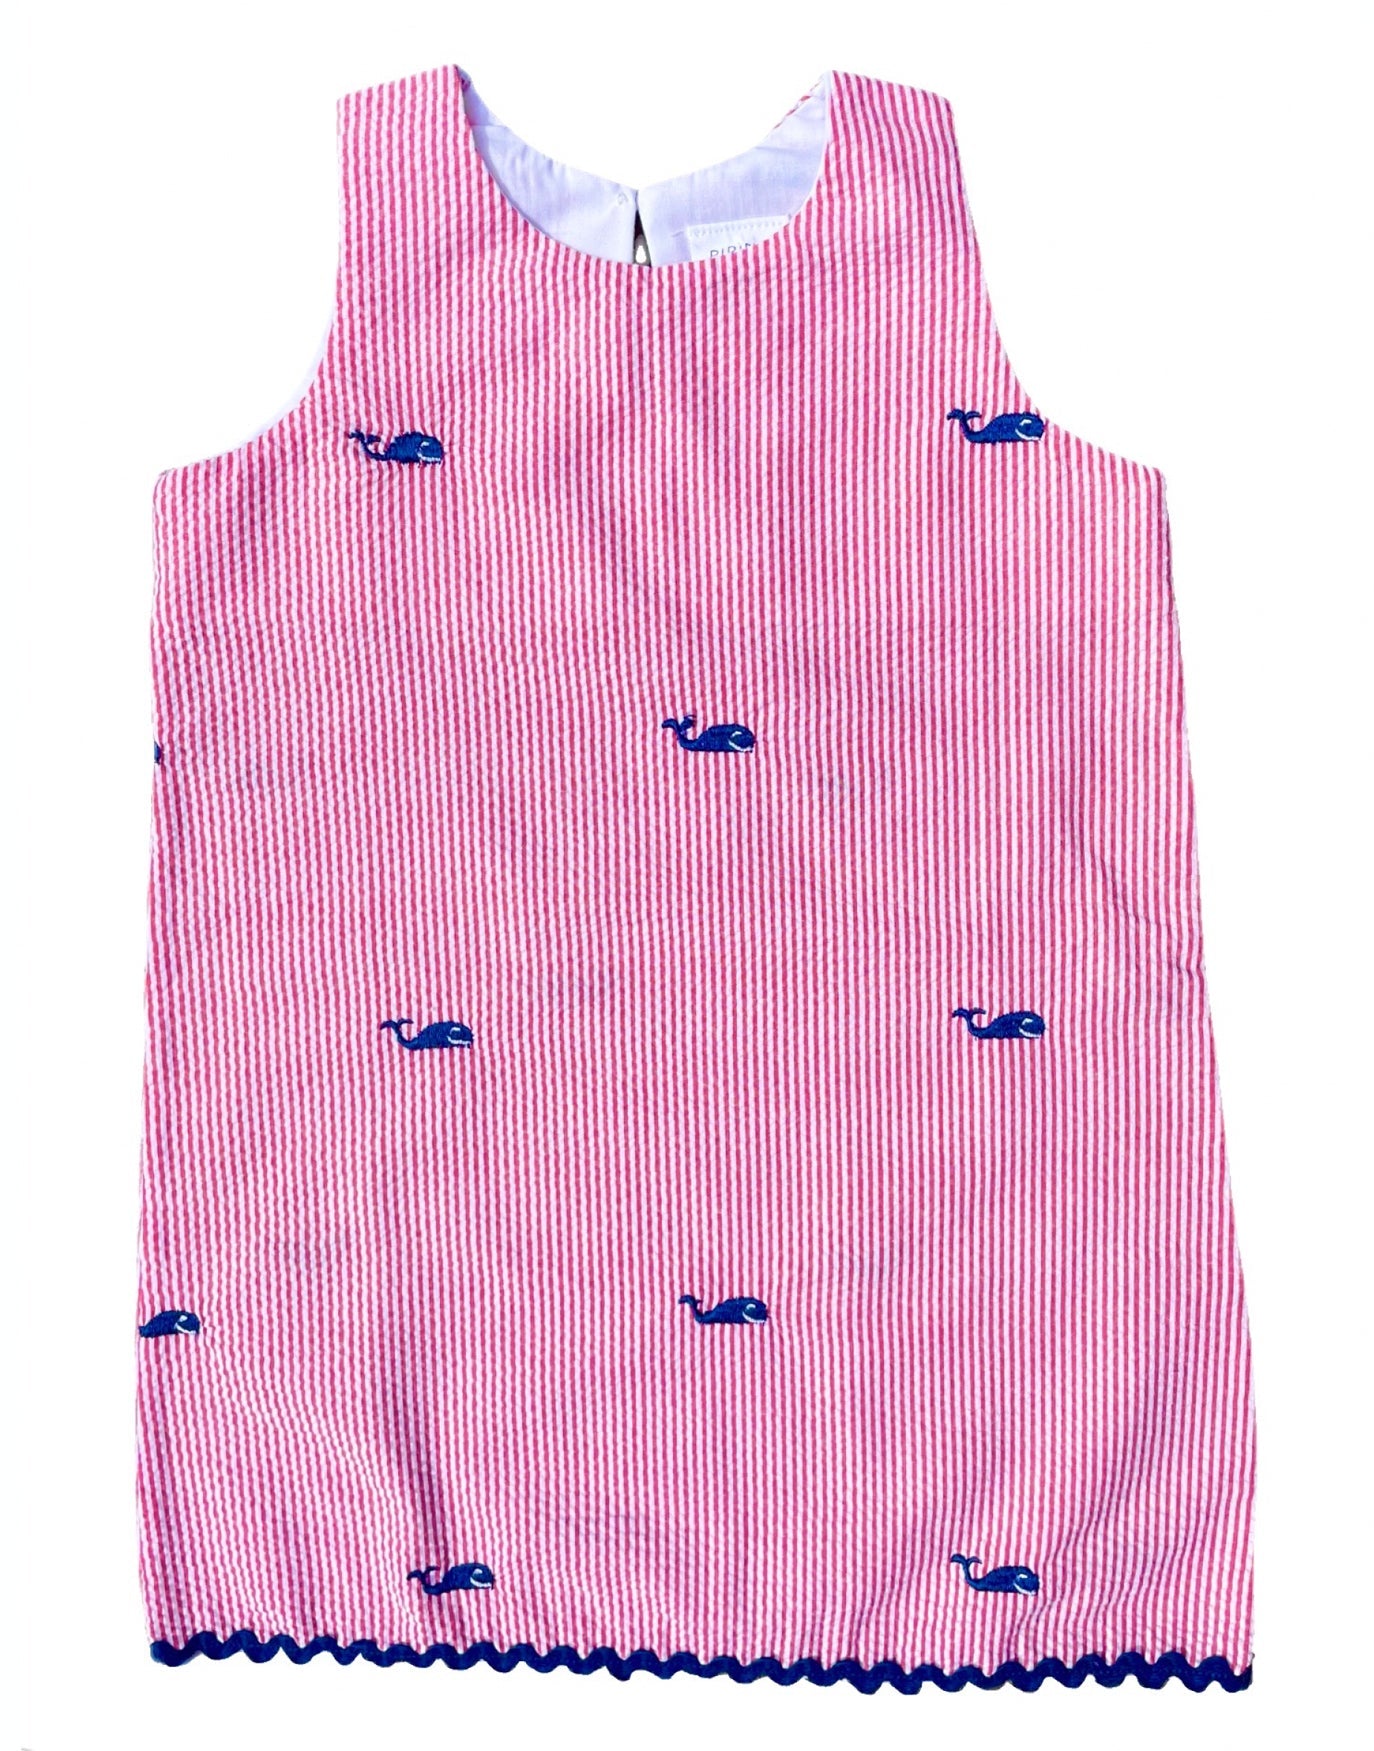 Red Seersucker Dress with Navy Embroidered Whales